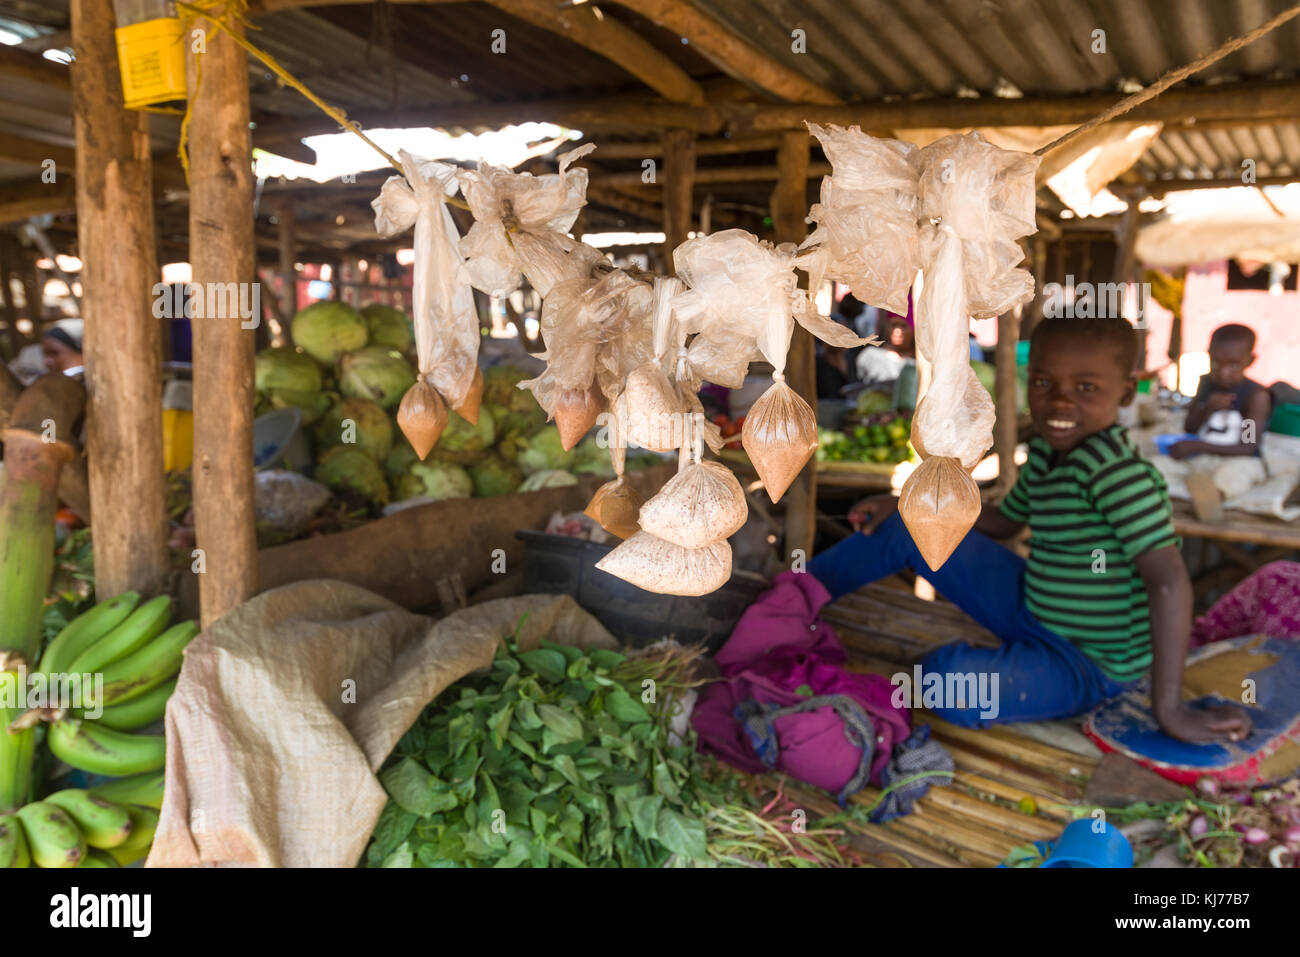 Bags of arrowroot powder on display at a fruit and vegetable stall in a market with boy in background sitting in the shade, Uganda, Africa Stock Photo